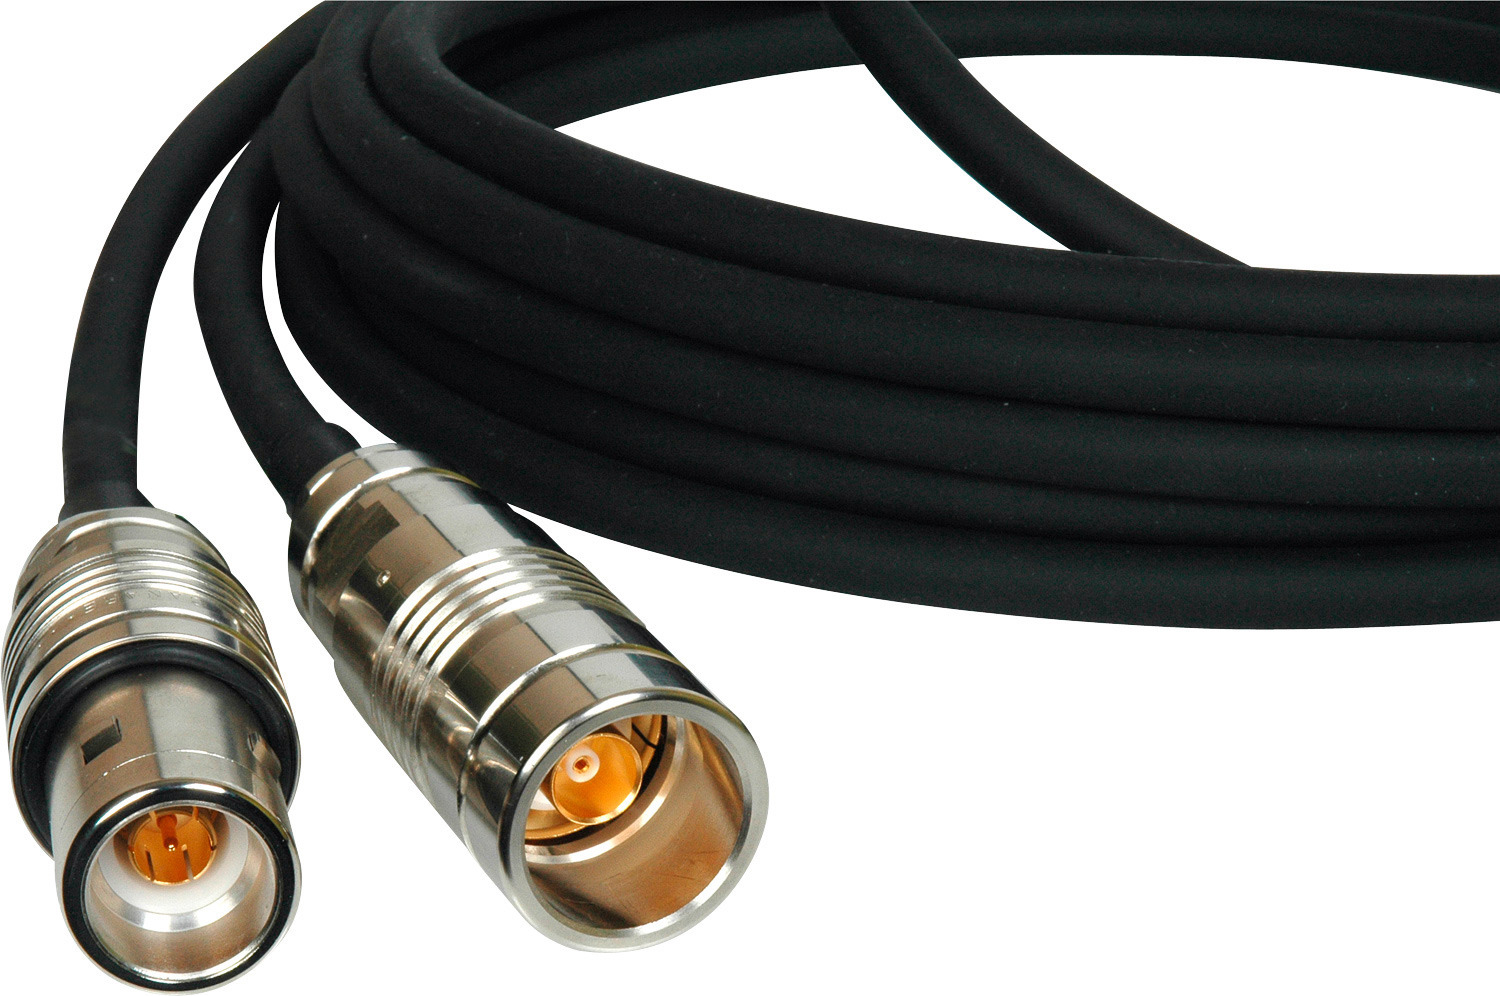 Laird TRI-1857A-100 Belden 1857A RG59/U Stranded Triax Male to Female Cable - 100 Foot